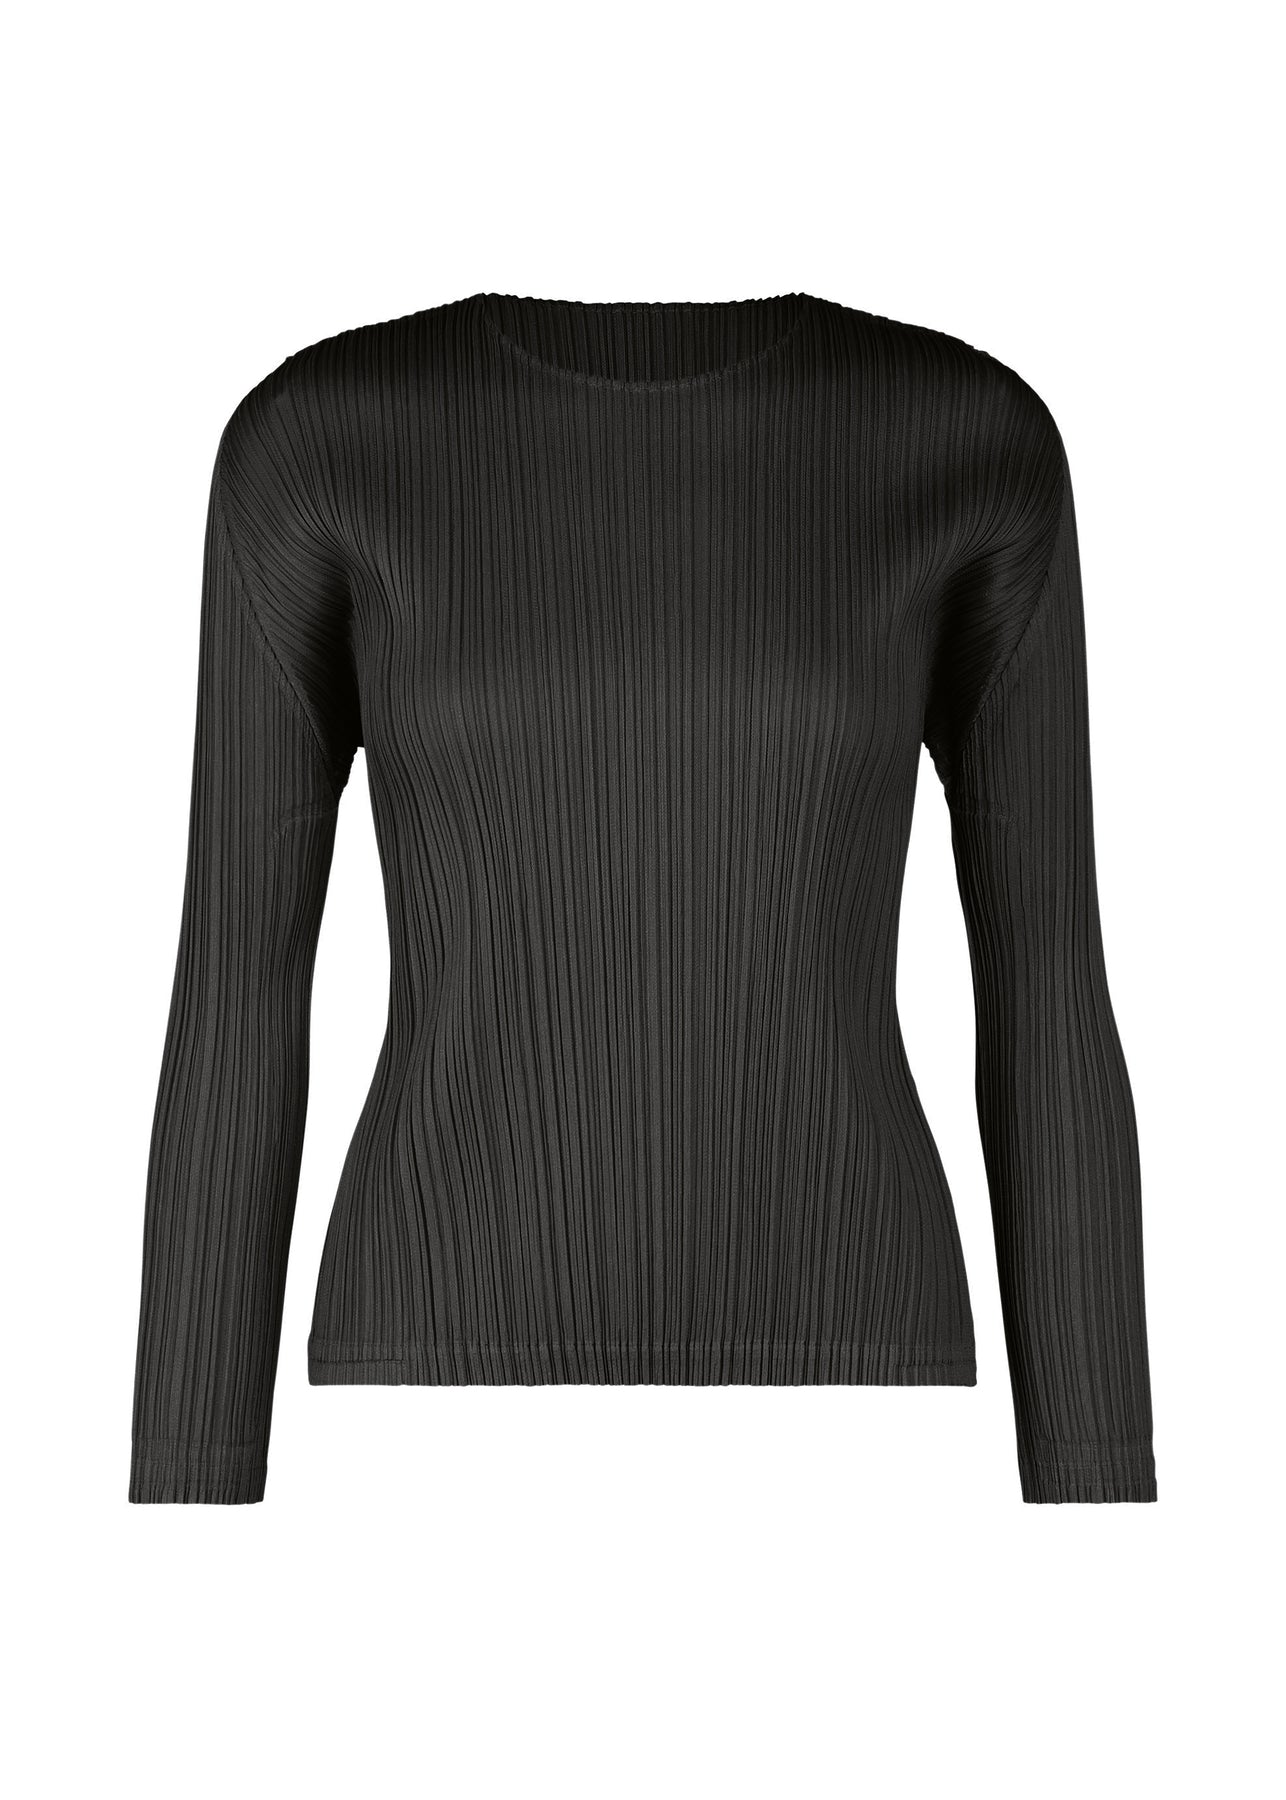 MONTHLY COLORS : DECEMBER TOP | The official ISSEY MIYAKE ONLINE 